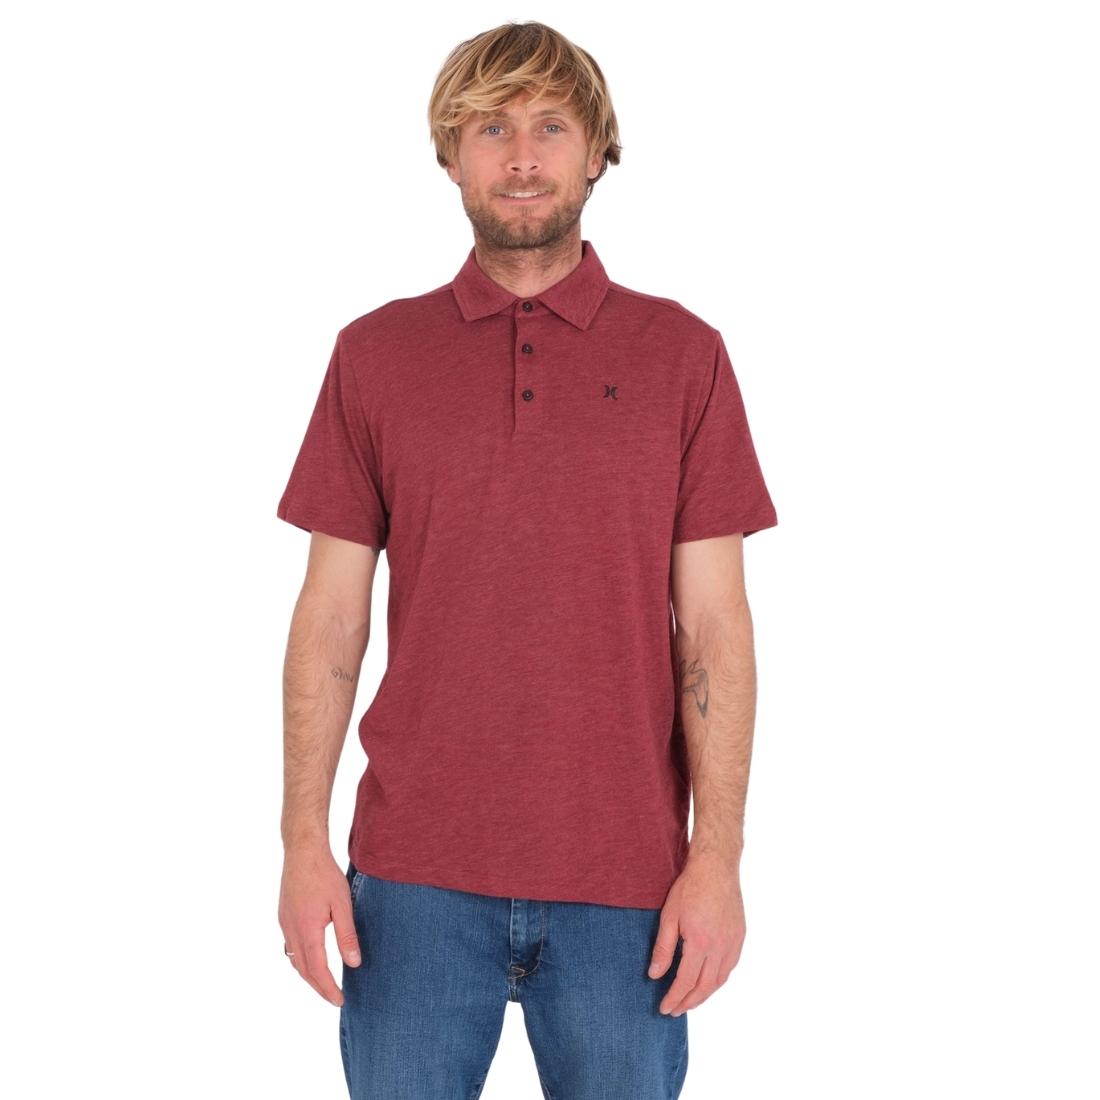 Hurley Ace Vista Polo Shirt - True Red Heather - Mens Polo Shirt by Hurley